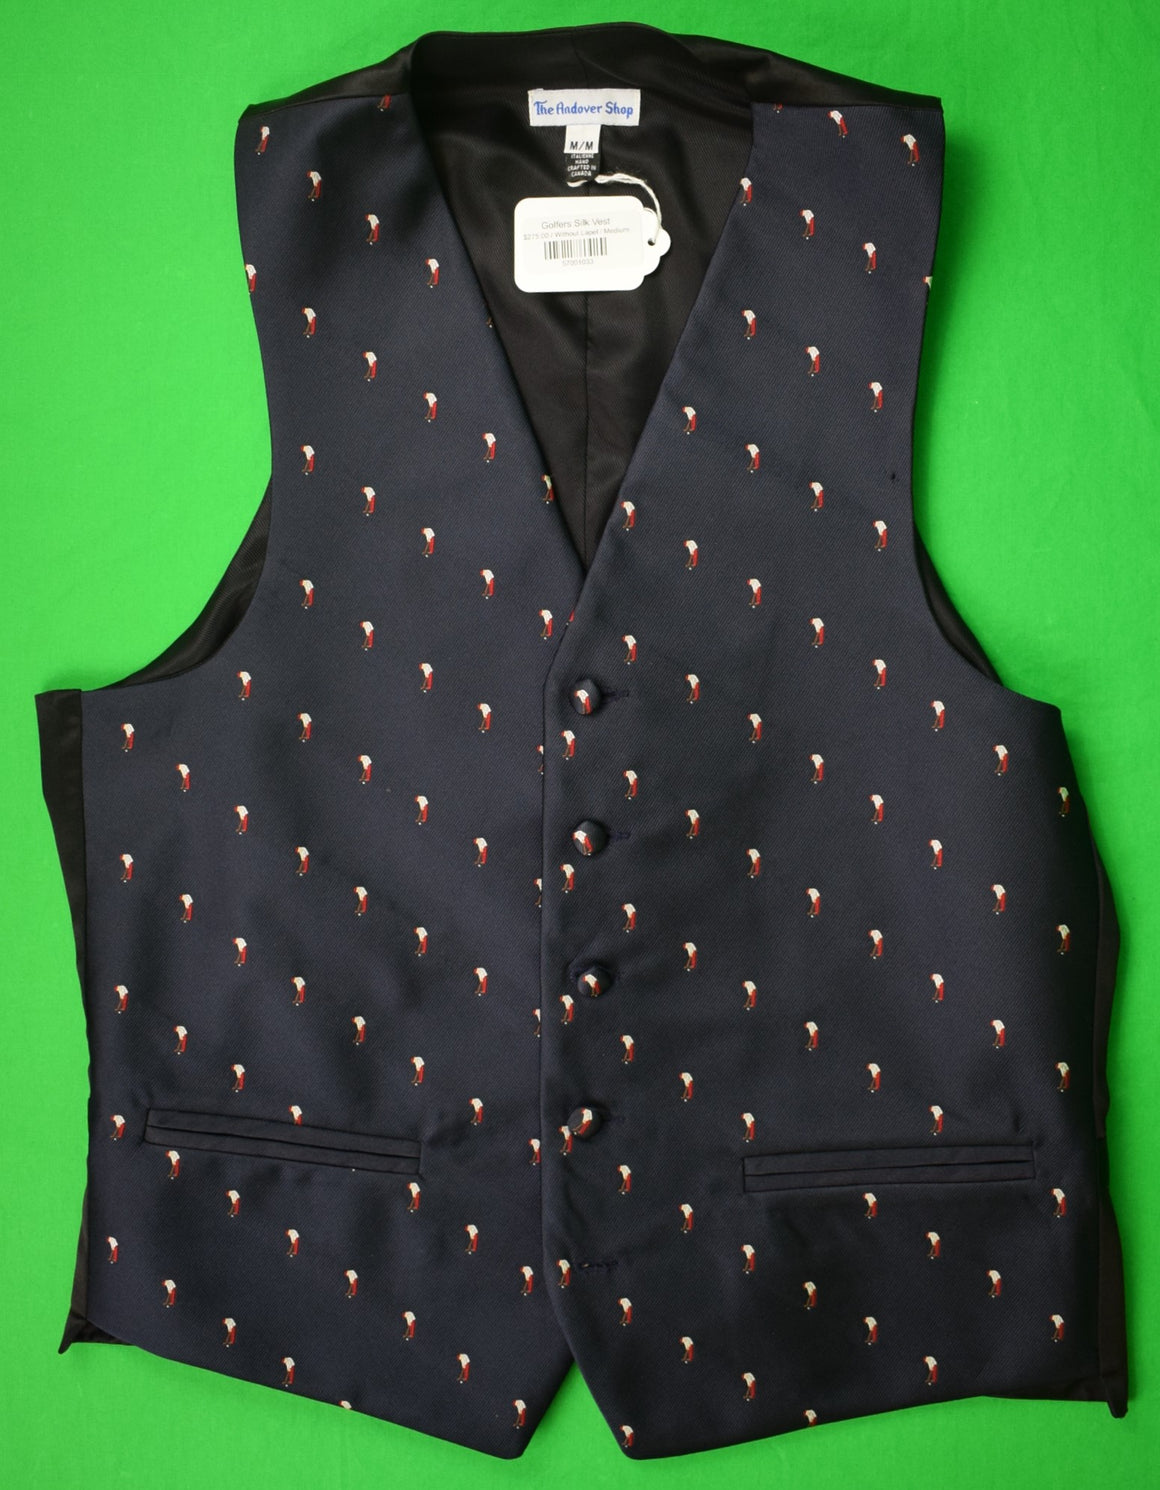 "The Andover Shop Italian Navy Silk w/ Red Golfer Embroidered Vest" Sz M (New w/ Tag)